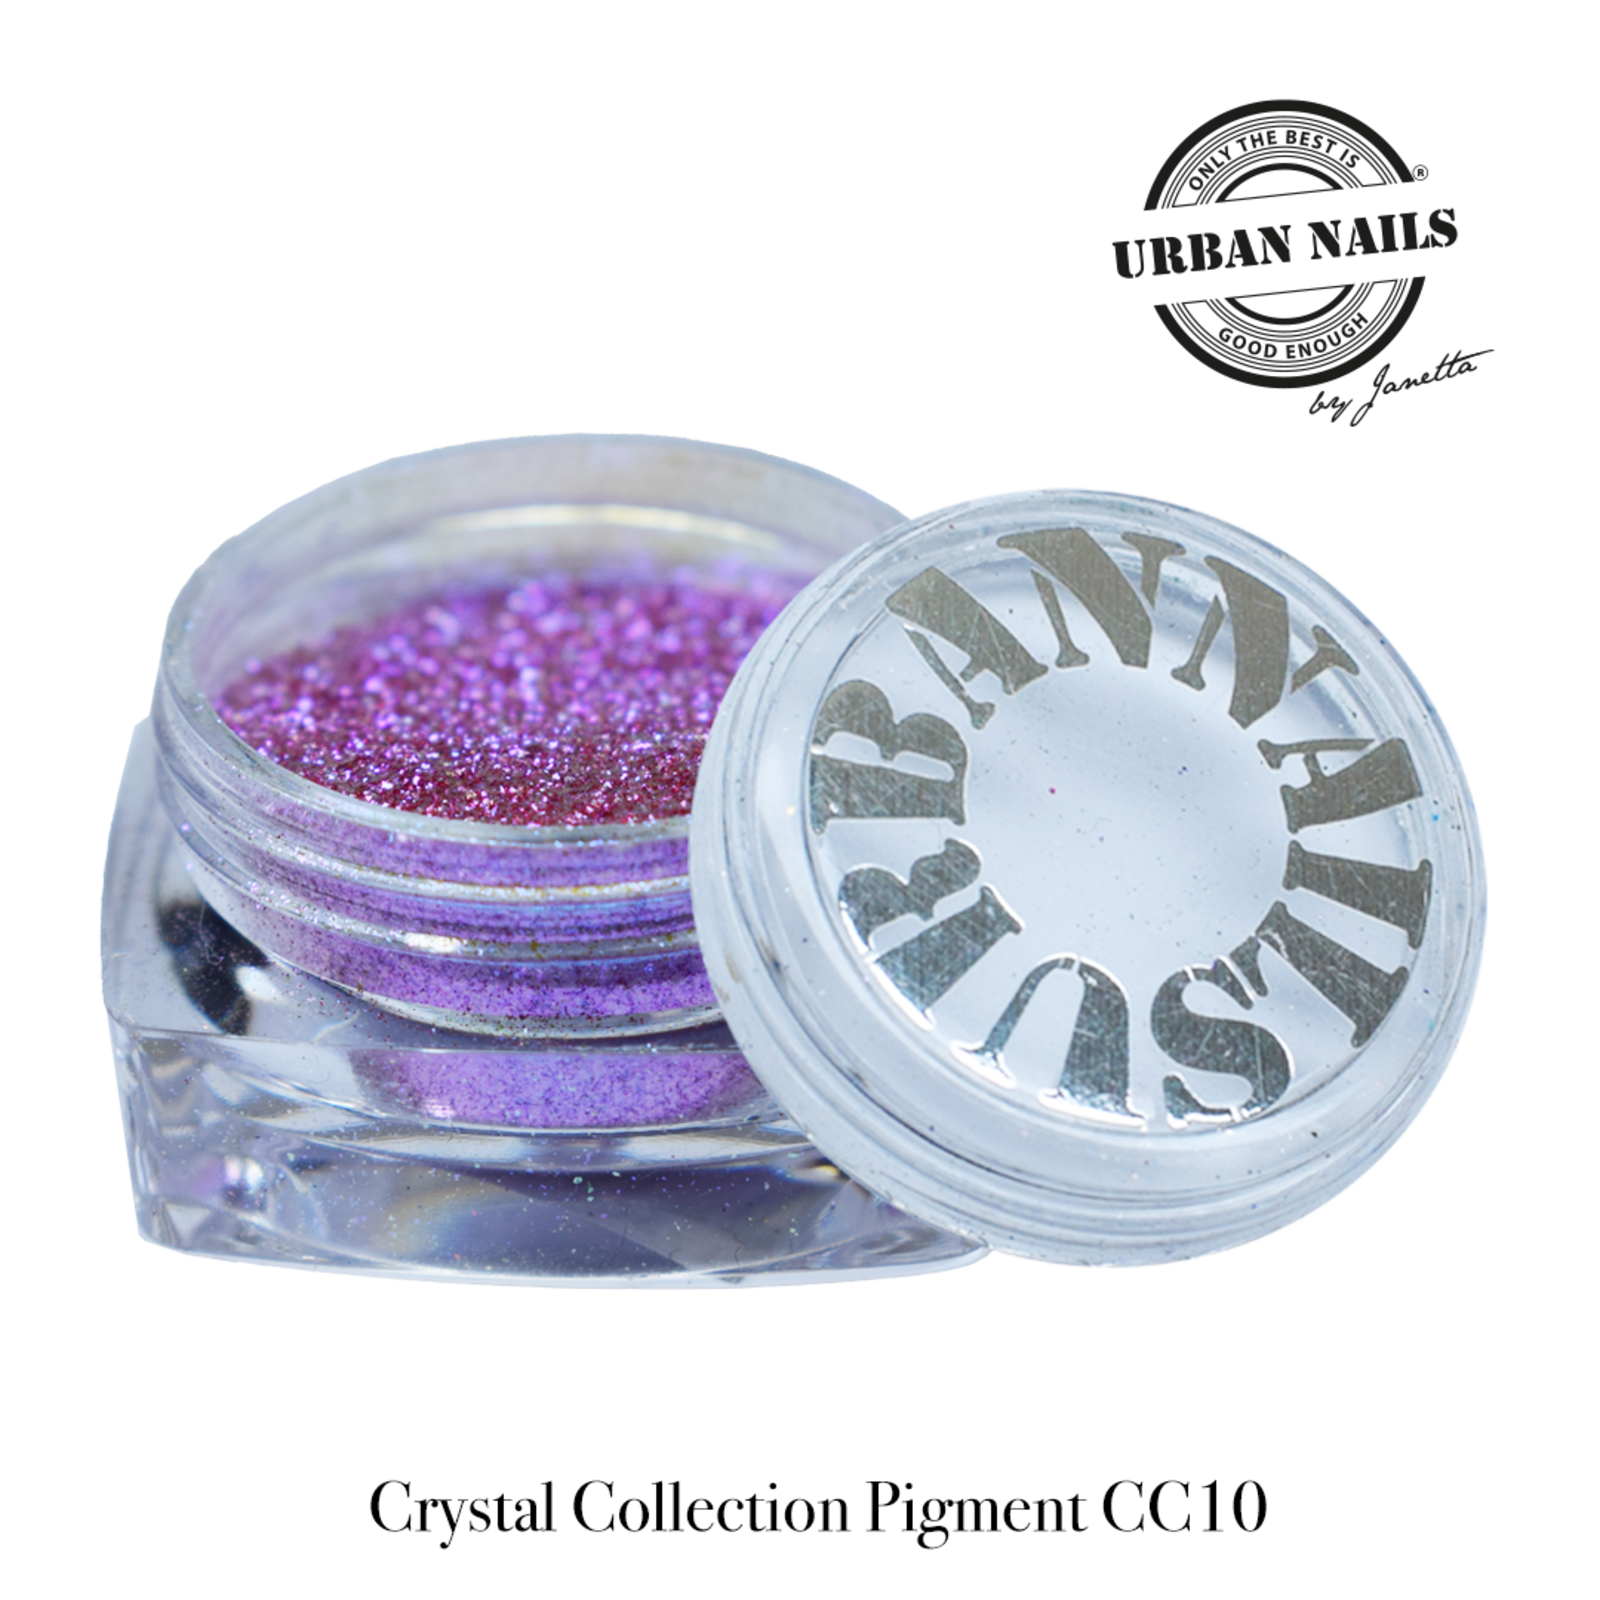 Urban nails Crystal Collection 10